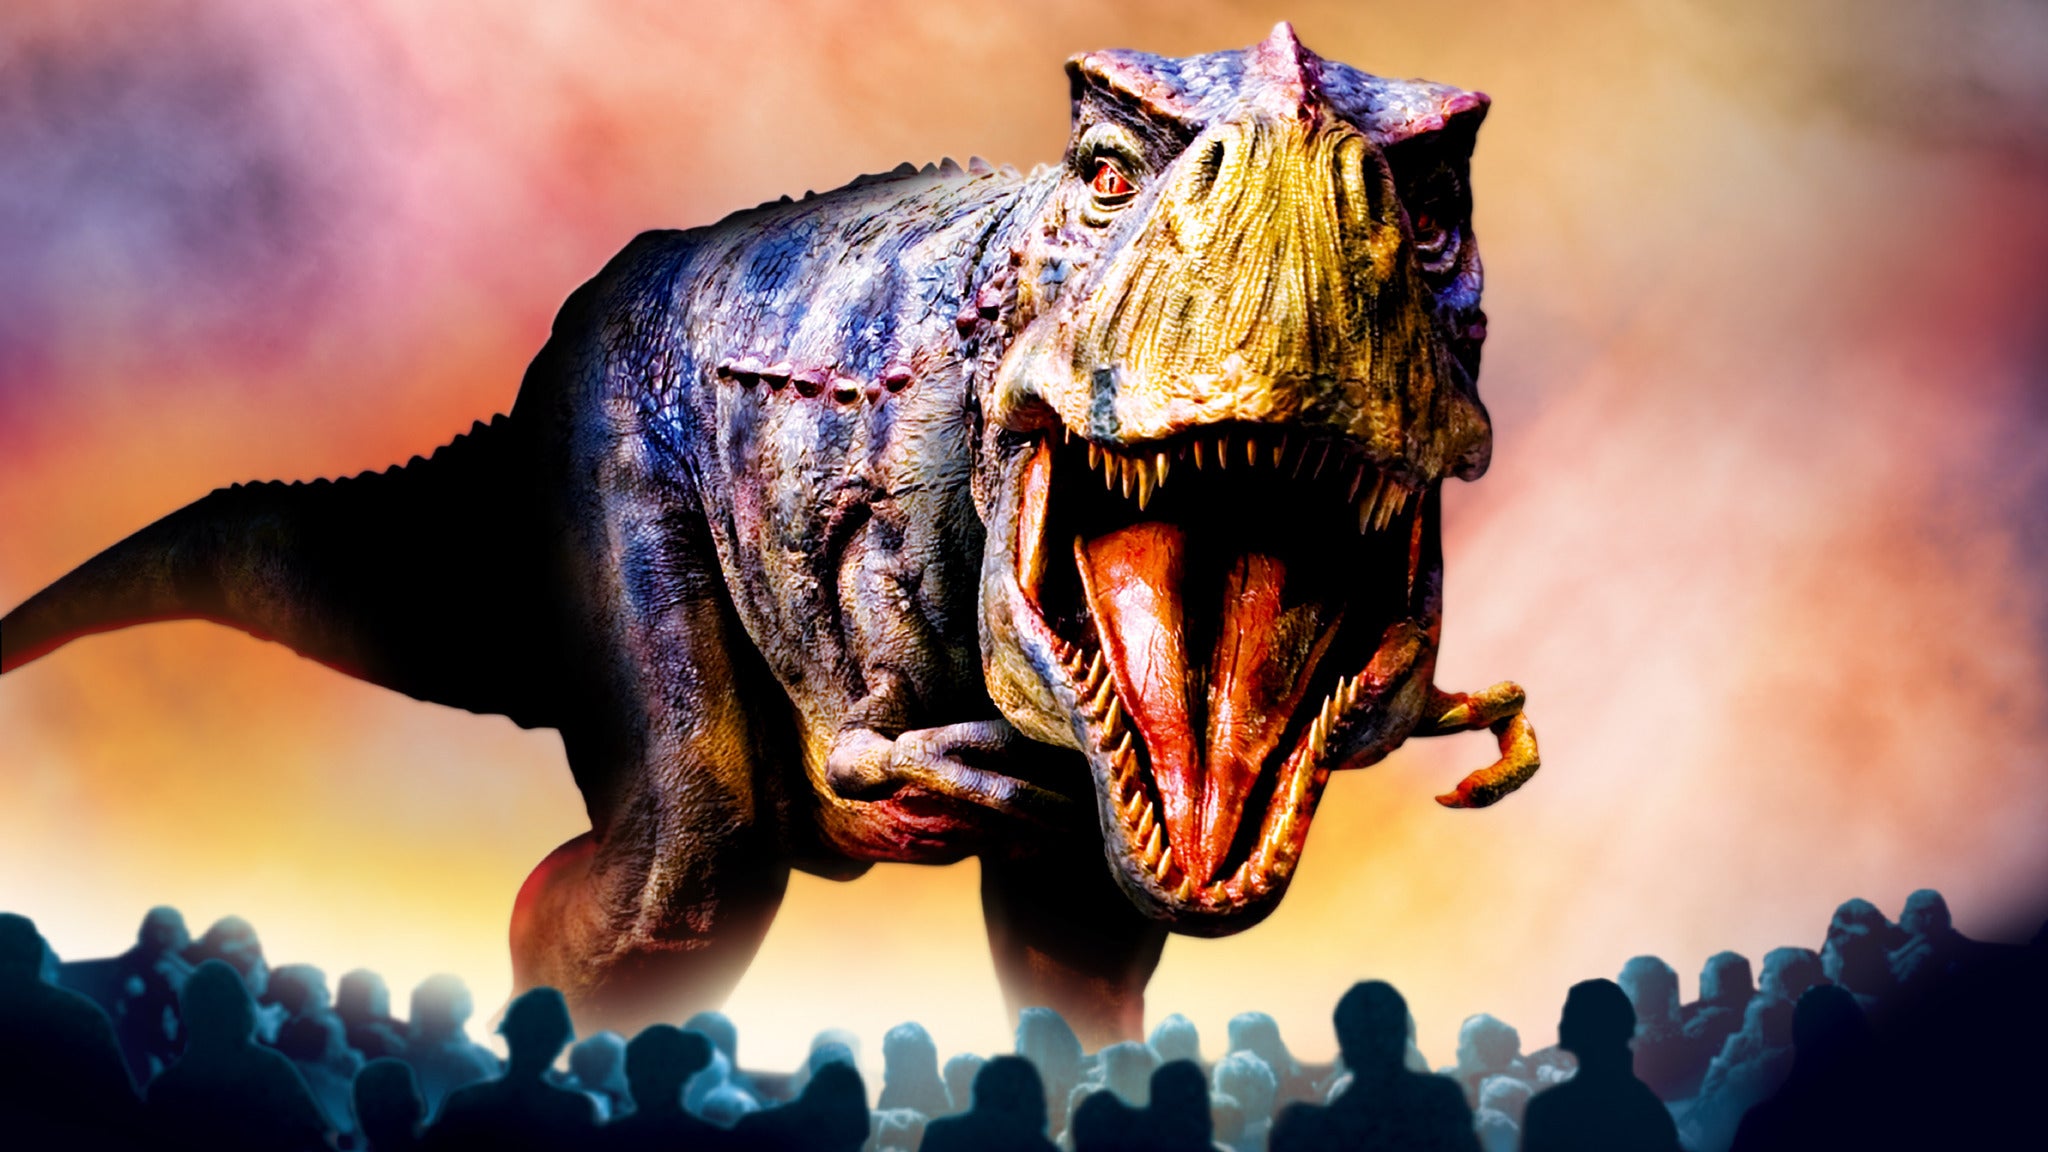 Walking with Dinosaurs - The Live 